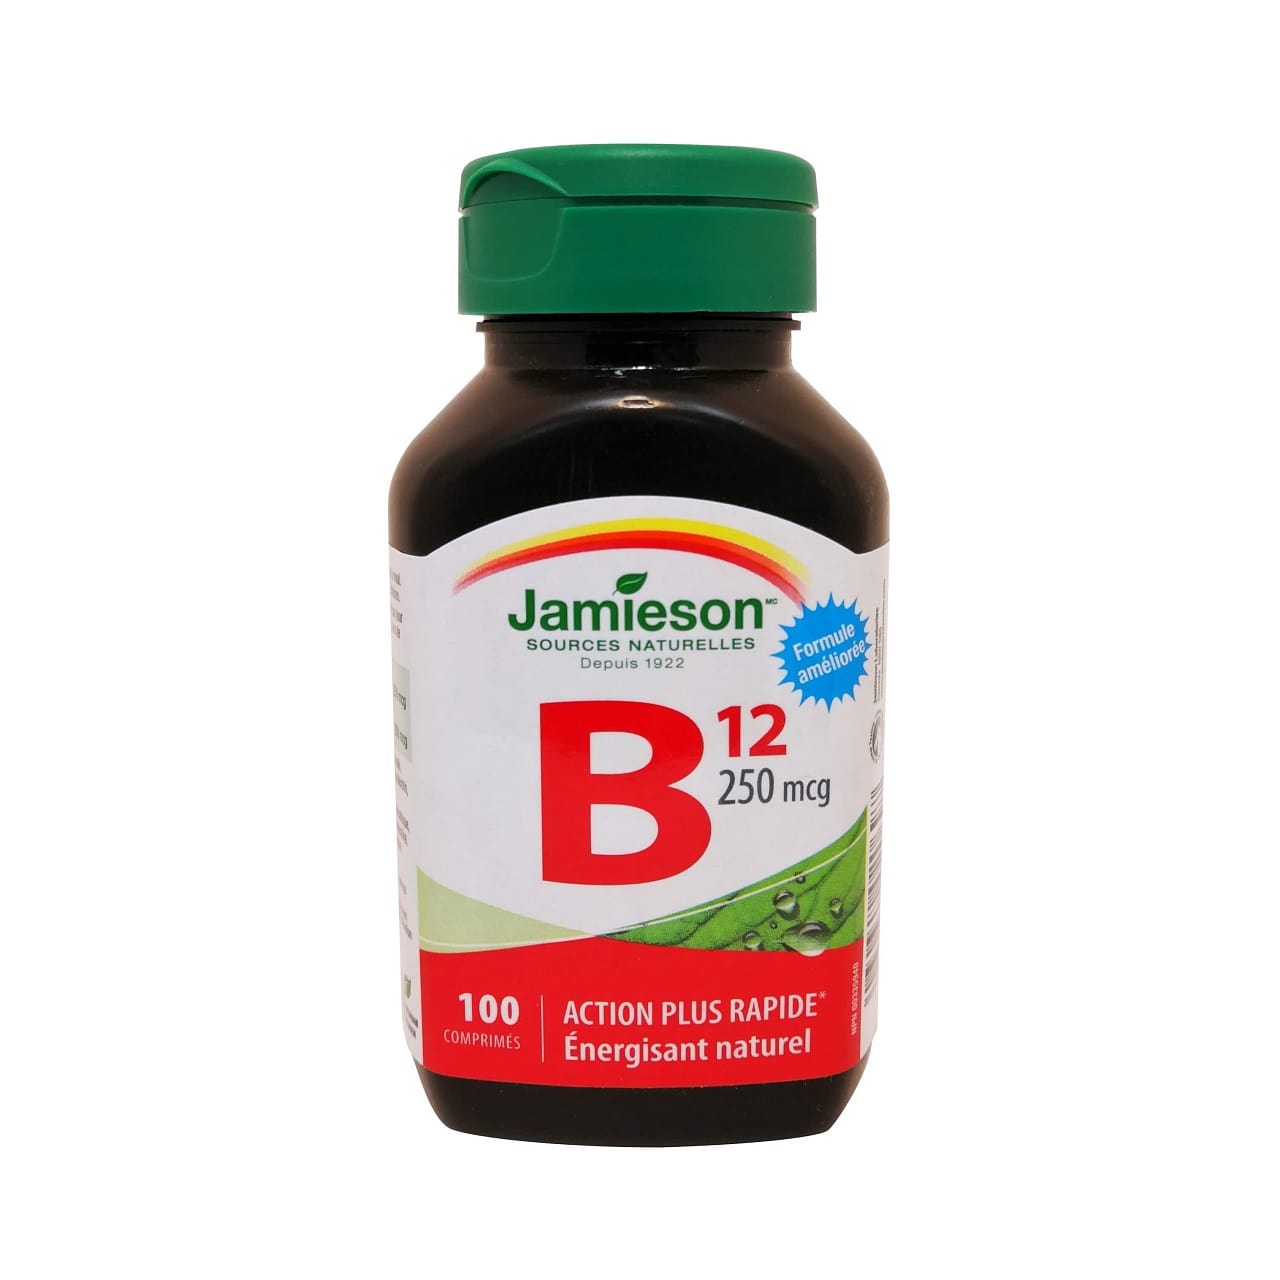 Product label for Jamieson B12 250mcg in French